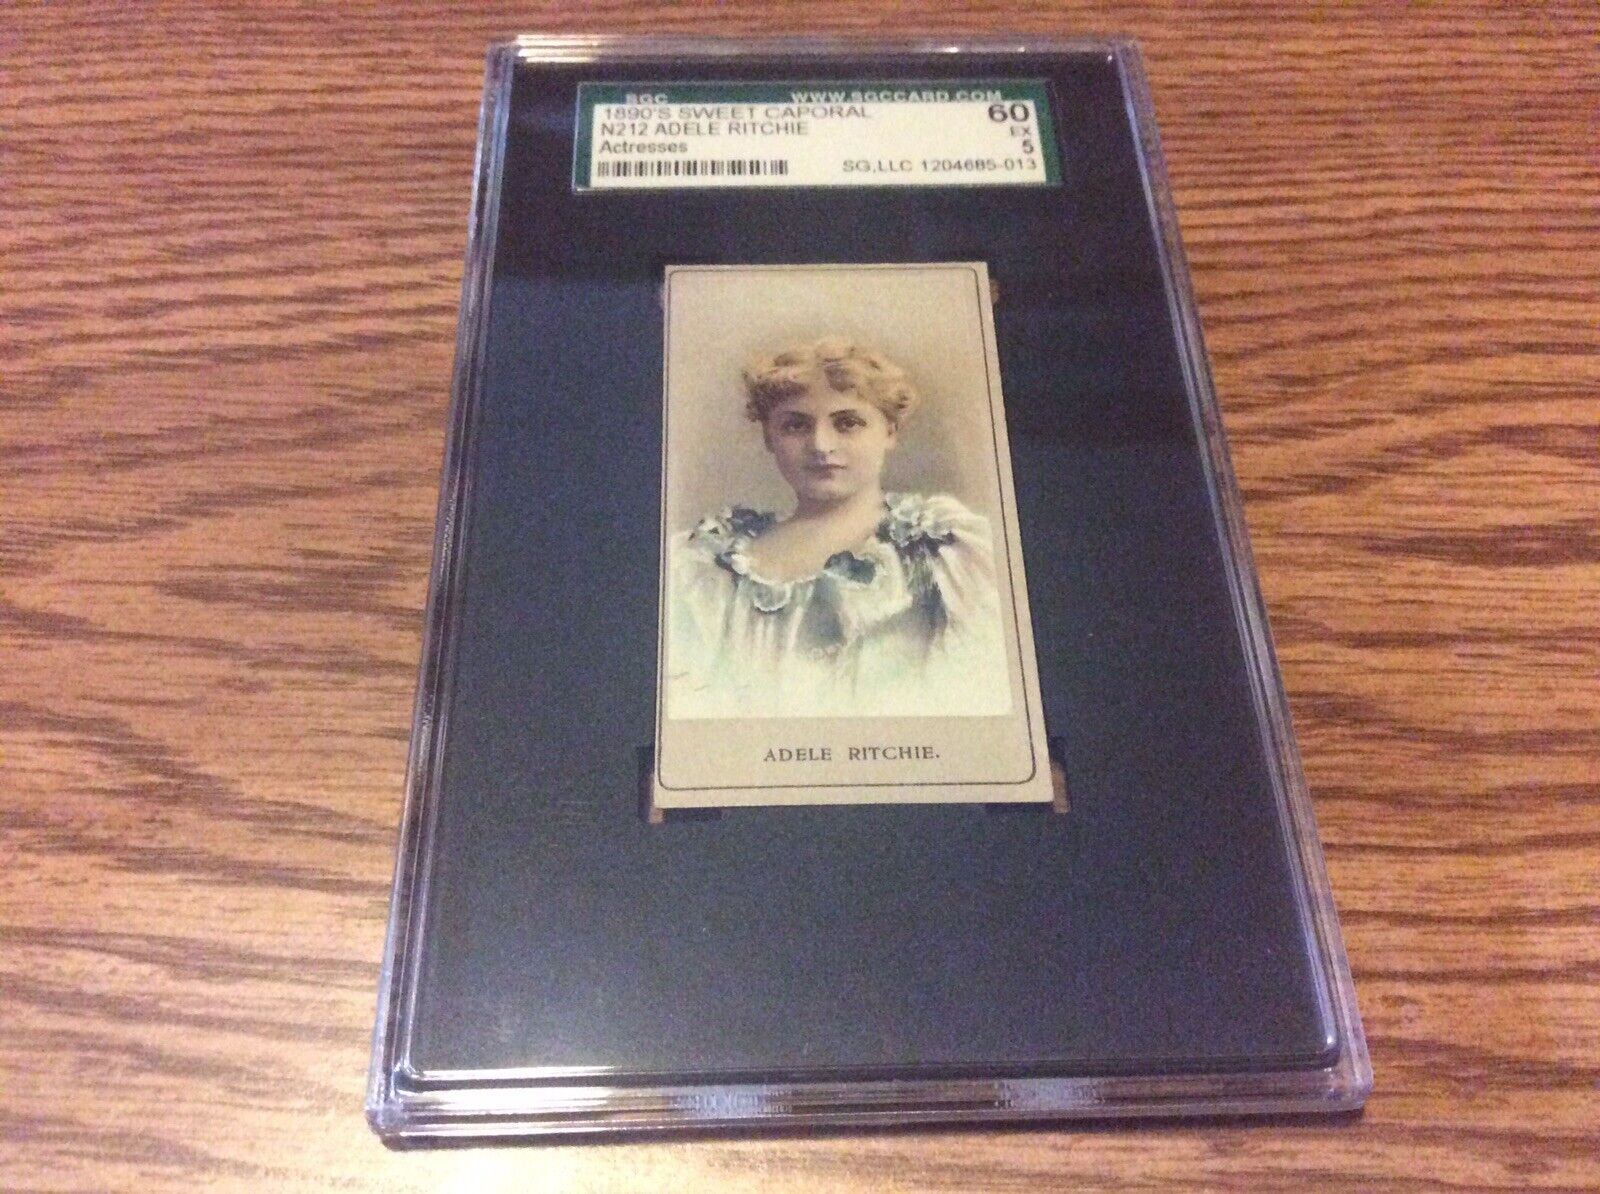 N212 Adele Ritchie Actress Sweet Caporal Graded Cigarette Tobacco Card